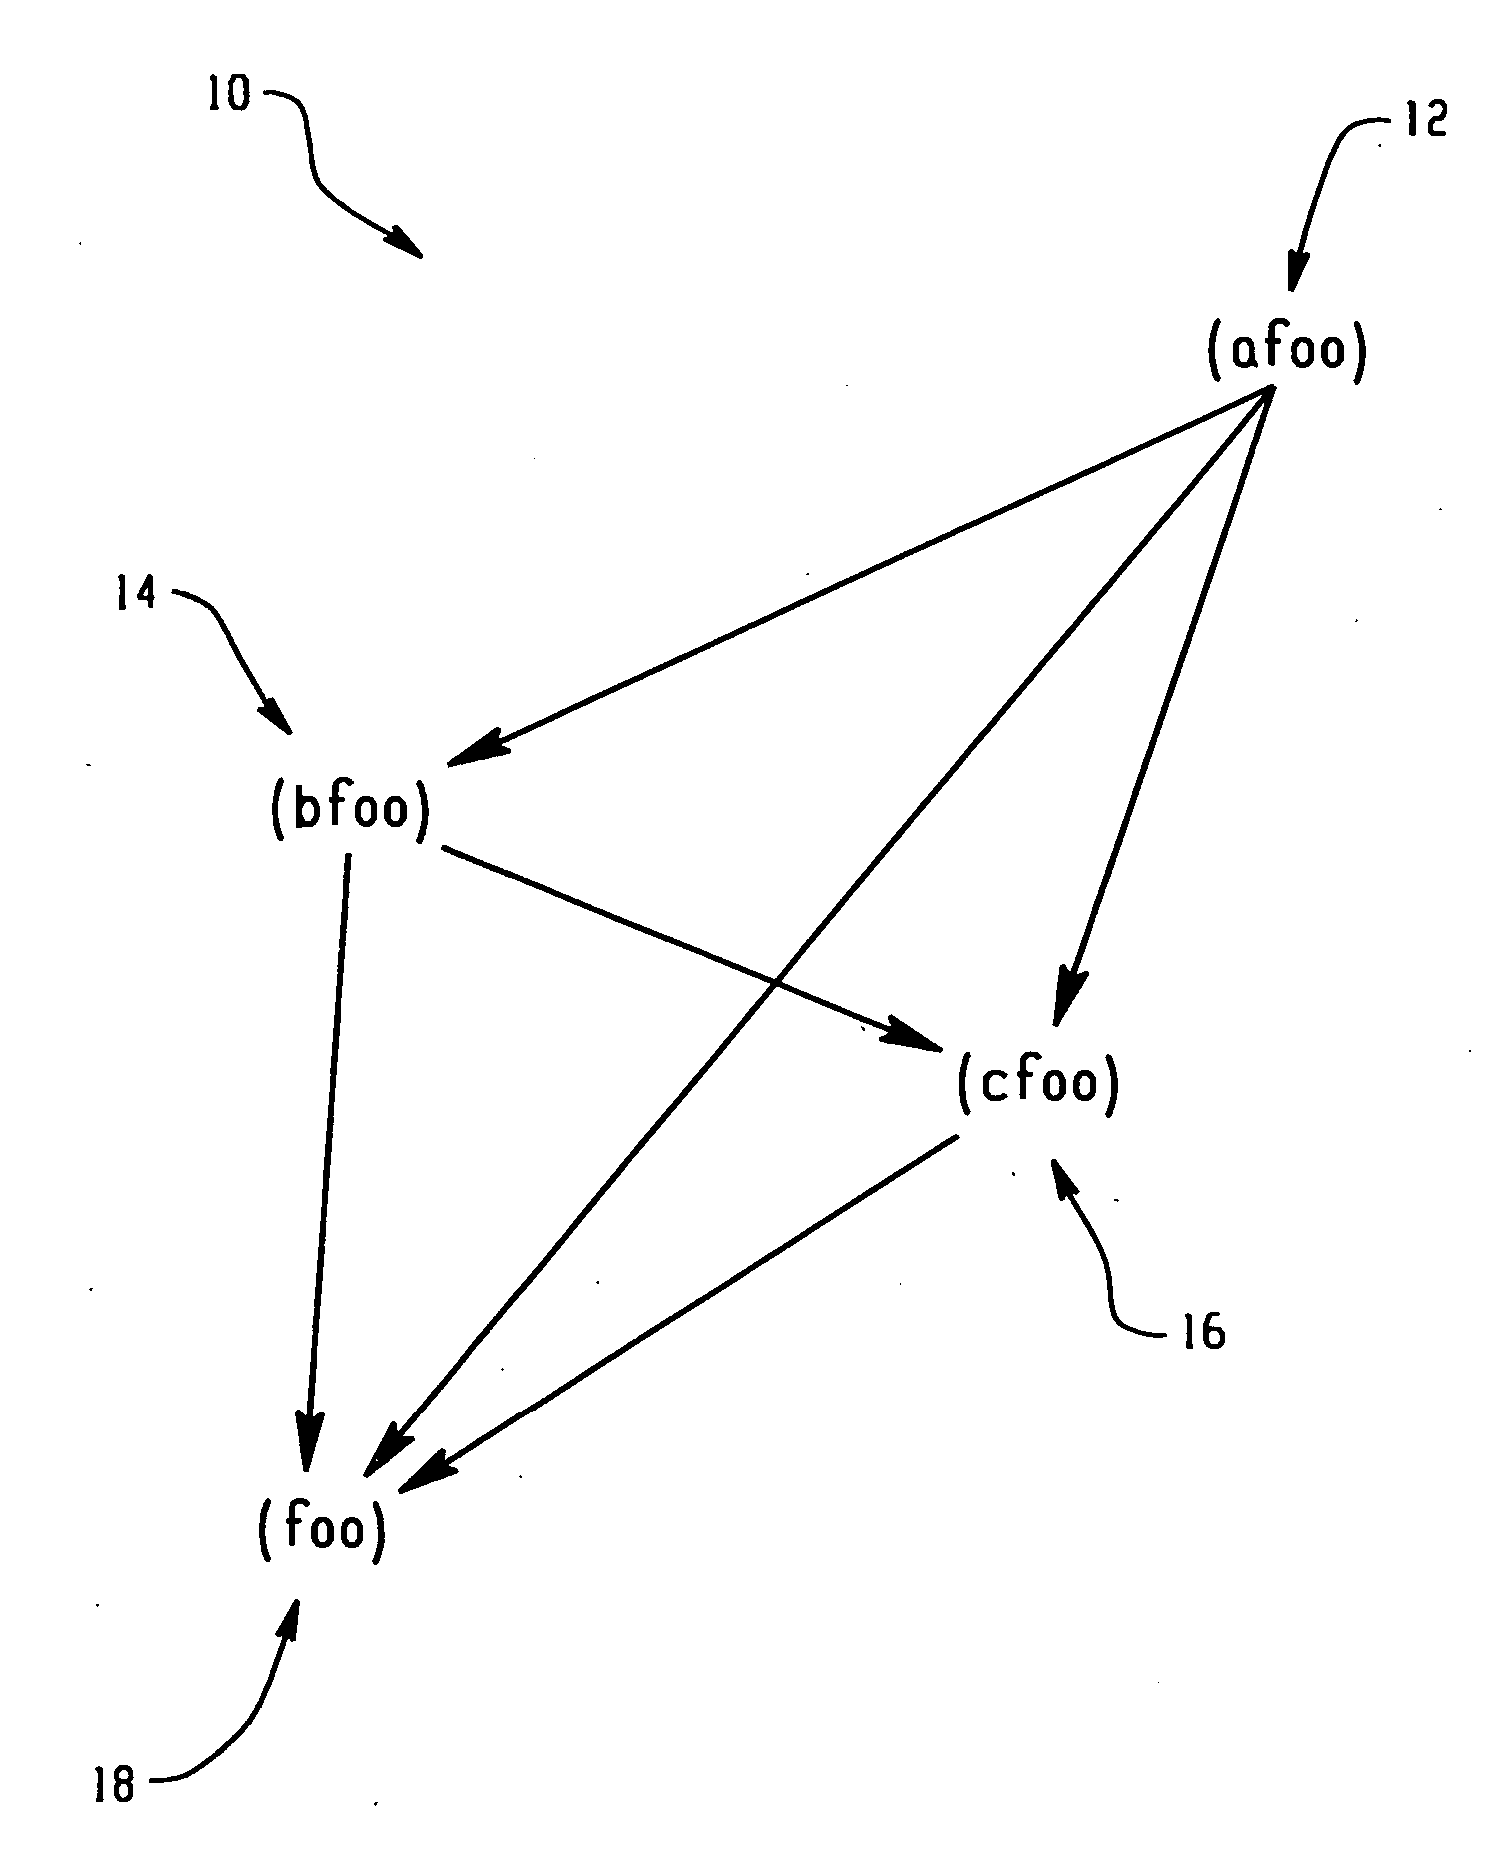 System and method for detecting redundant subroutine calls